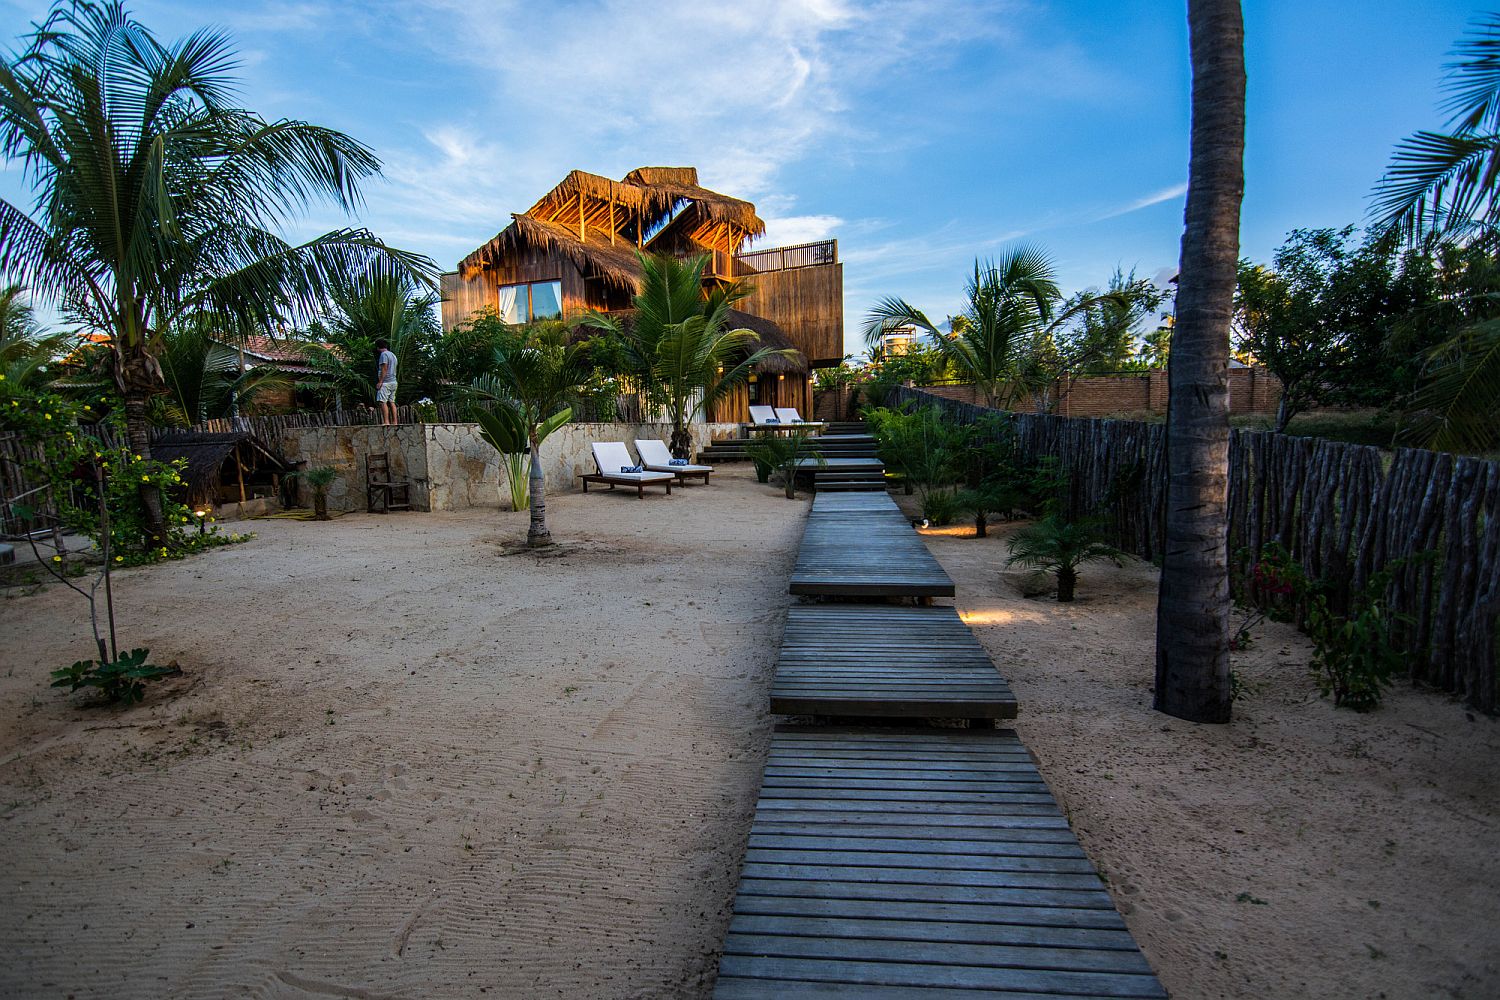 Wooden walkway leads to the summe house with modern beach style